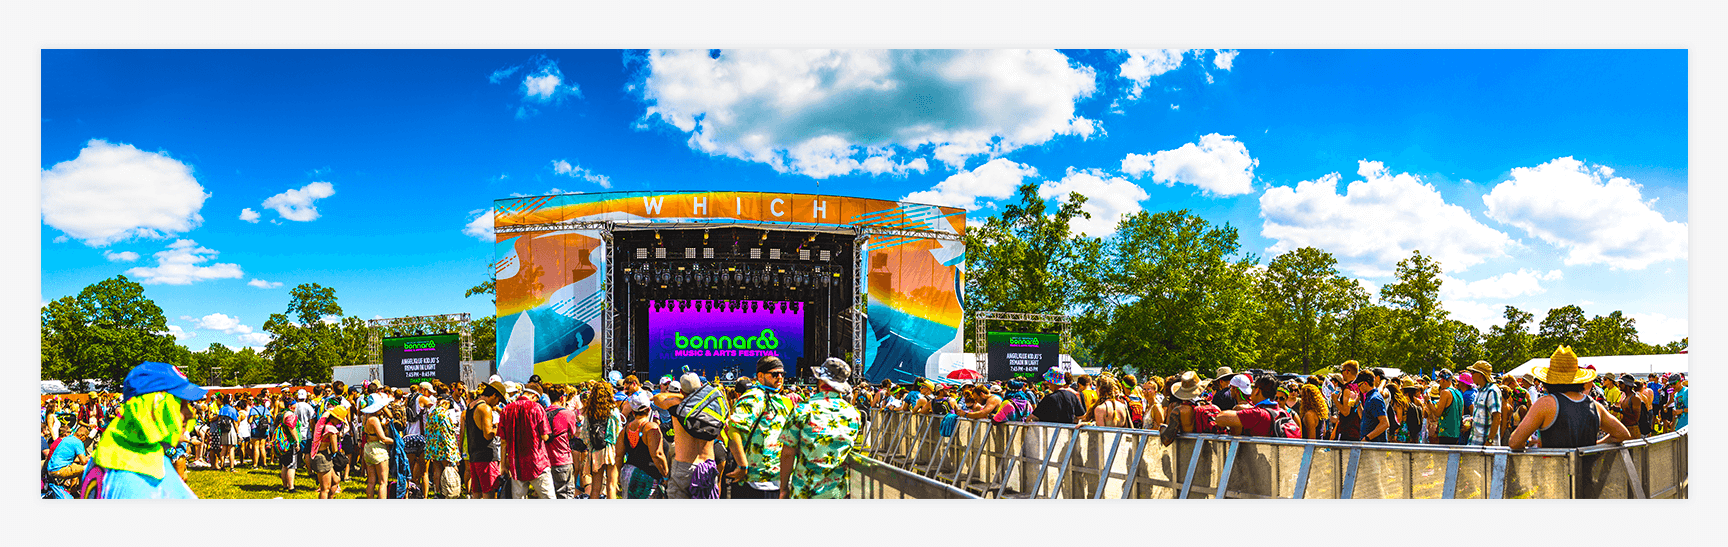 Panoramic Photo of the Which Stage scrims for 2017 Bonnaroo Music and Arts Festival in Manchester, Tennessee